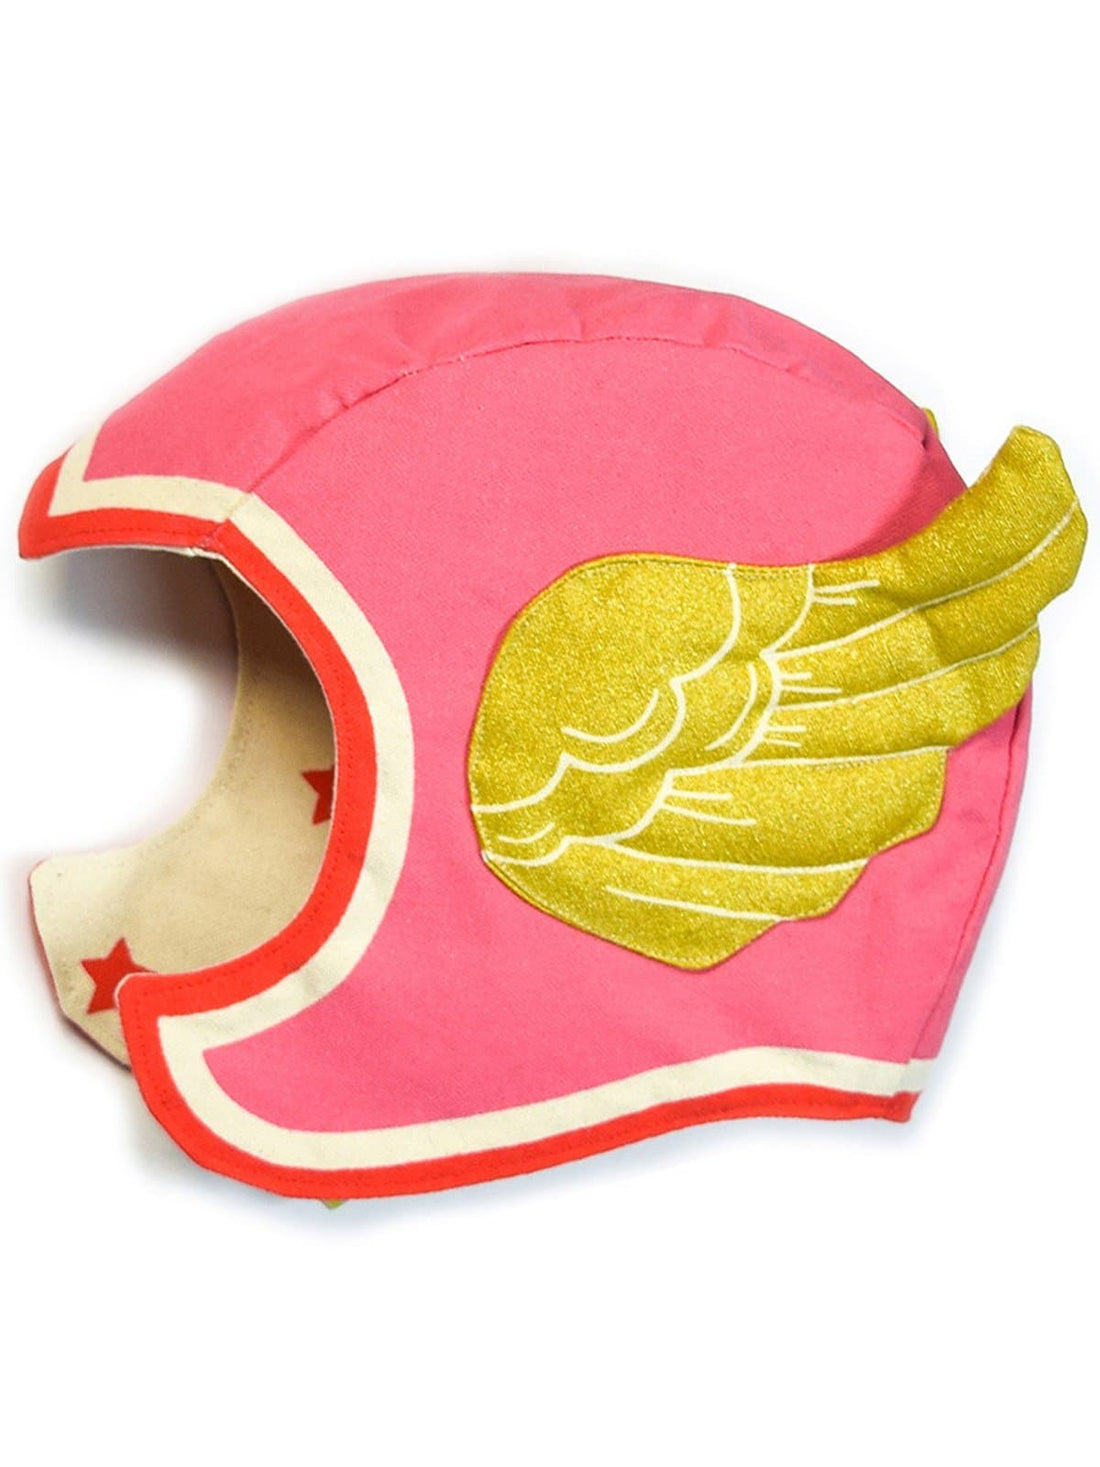 PINK WINGED HAT, S/M